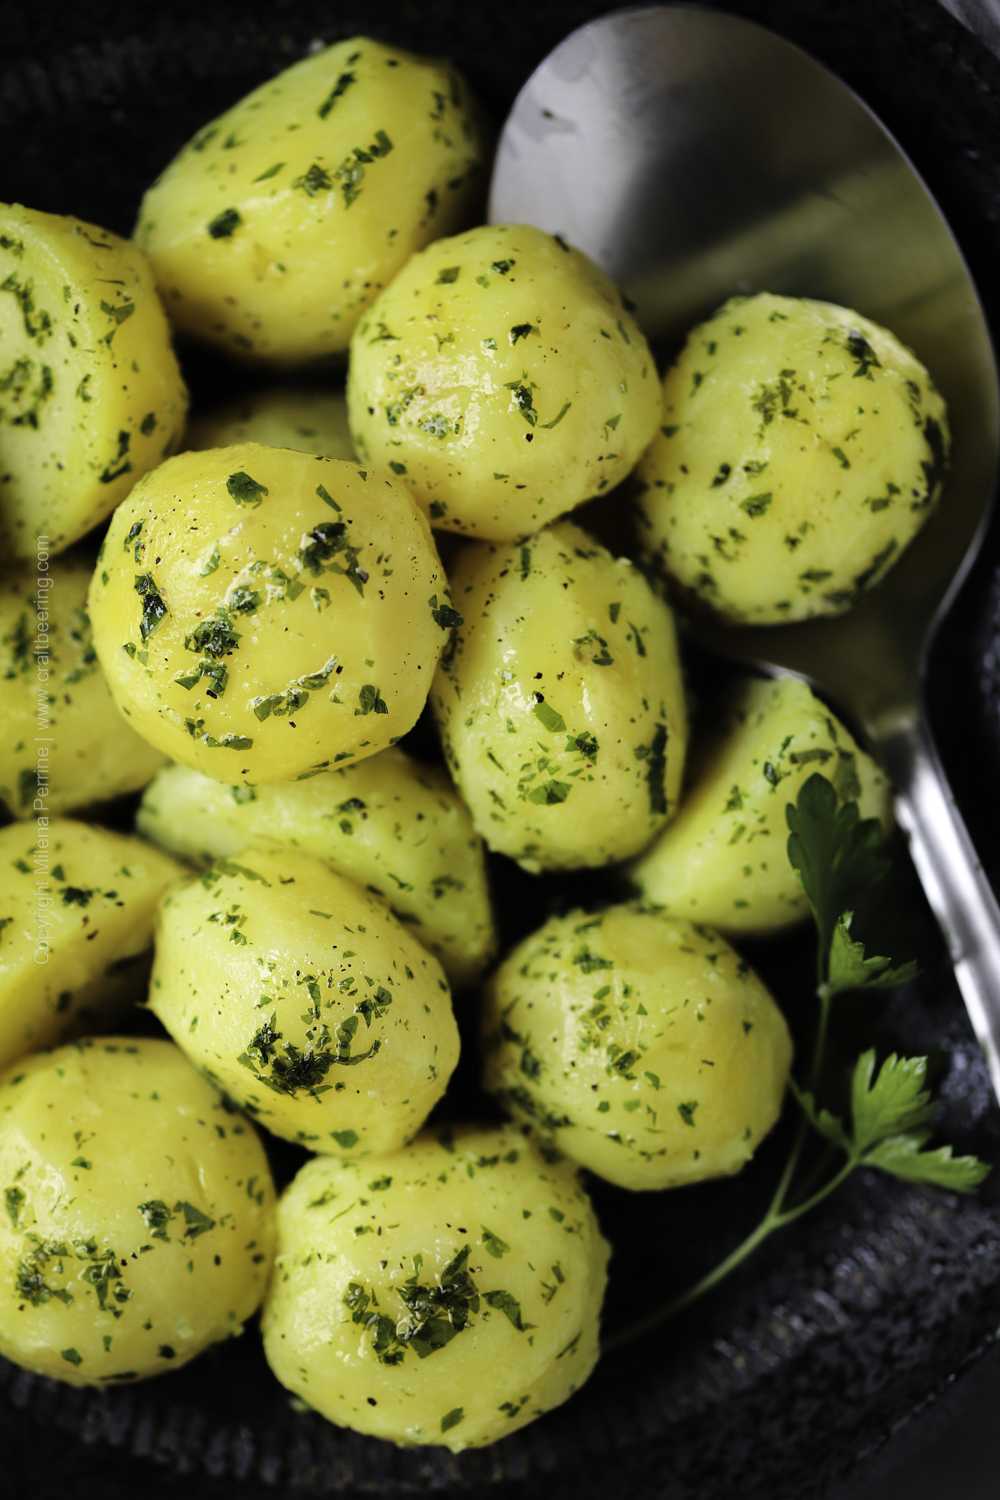 Boiled potatoes parsley butter sauce